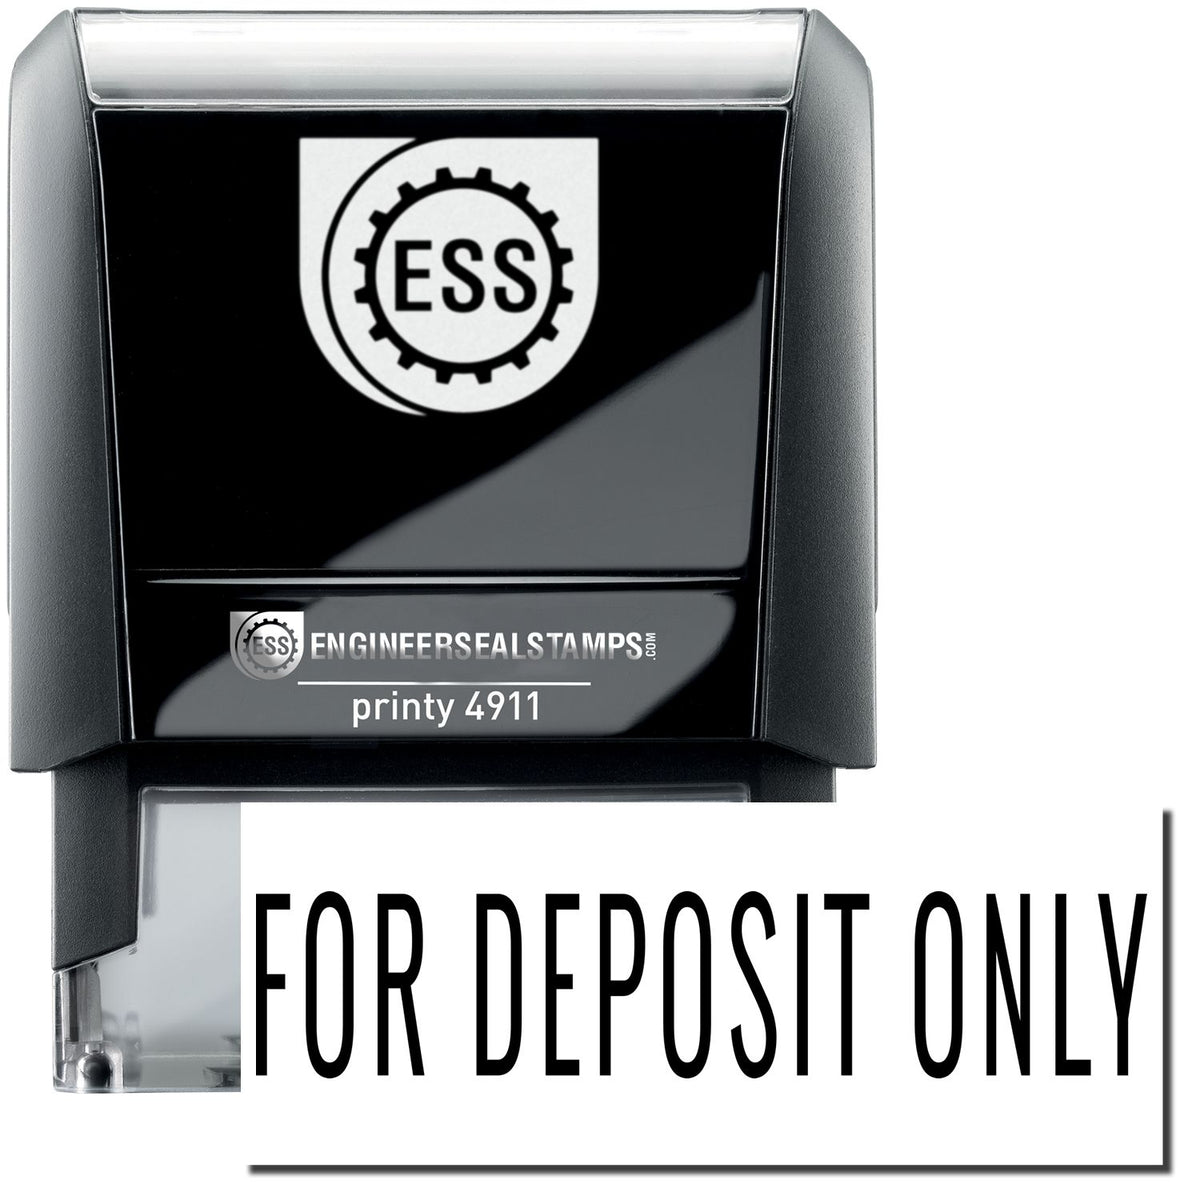 A self-inking stamp with a stamped image showing how the text &quot;FOR DEPOSIT ONLY&quot; in a narrow font is displayed after stamping.